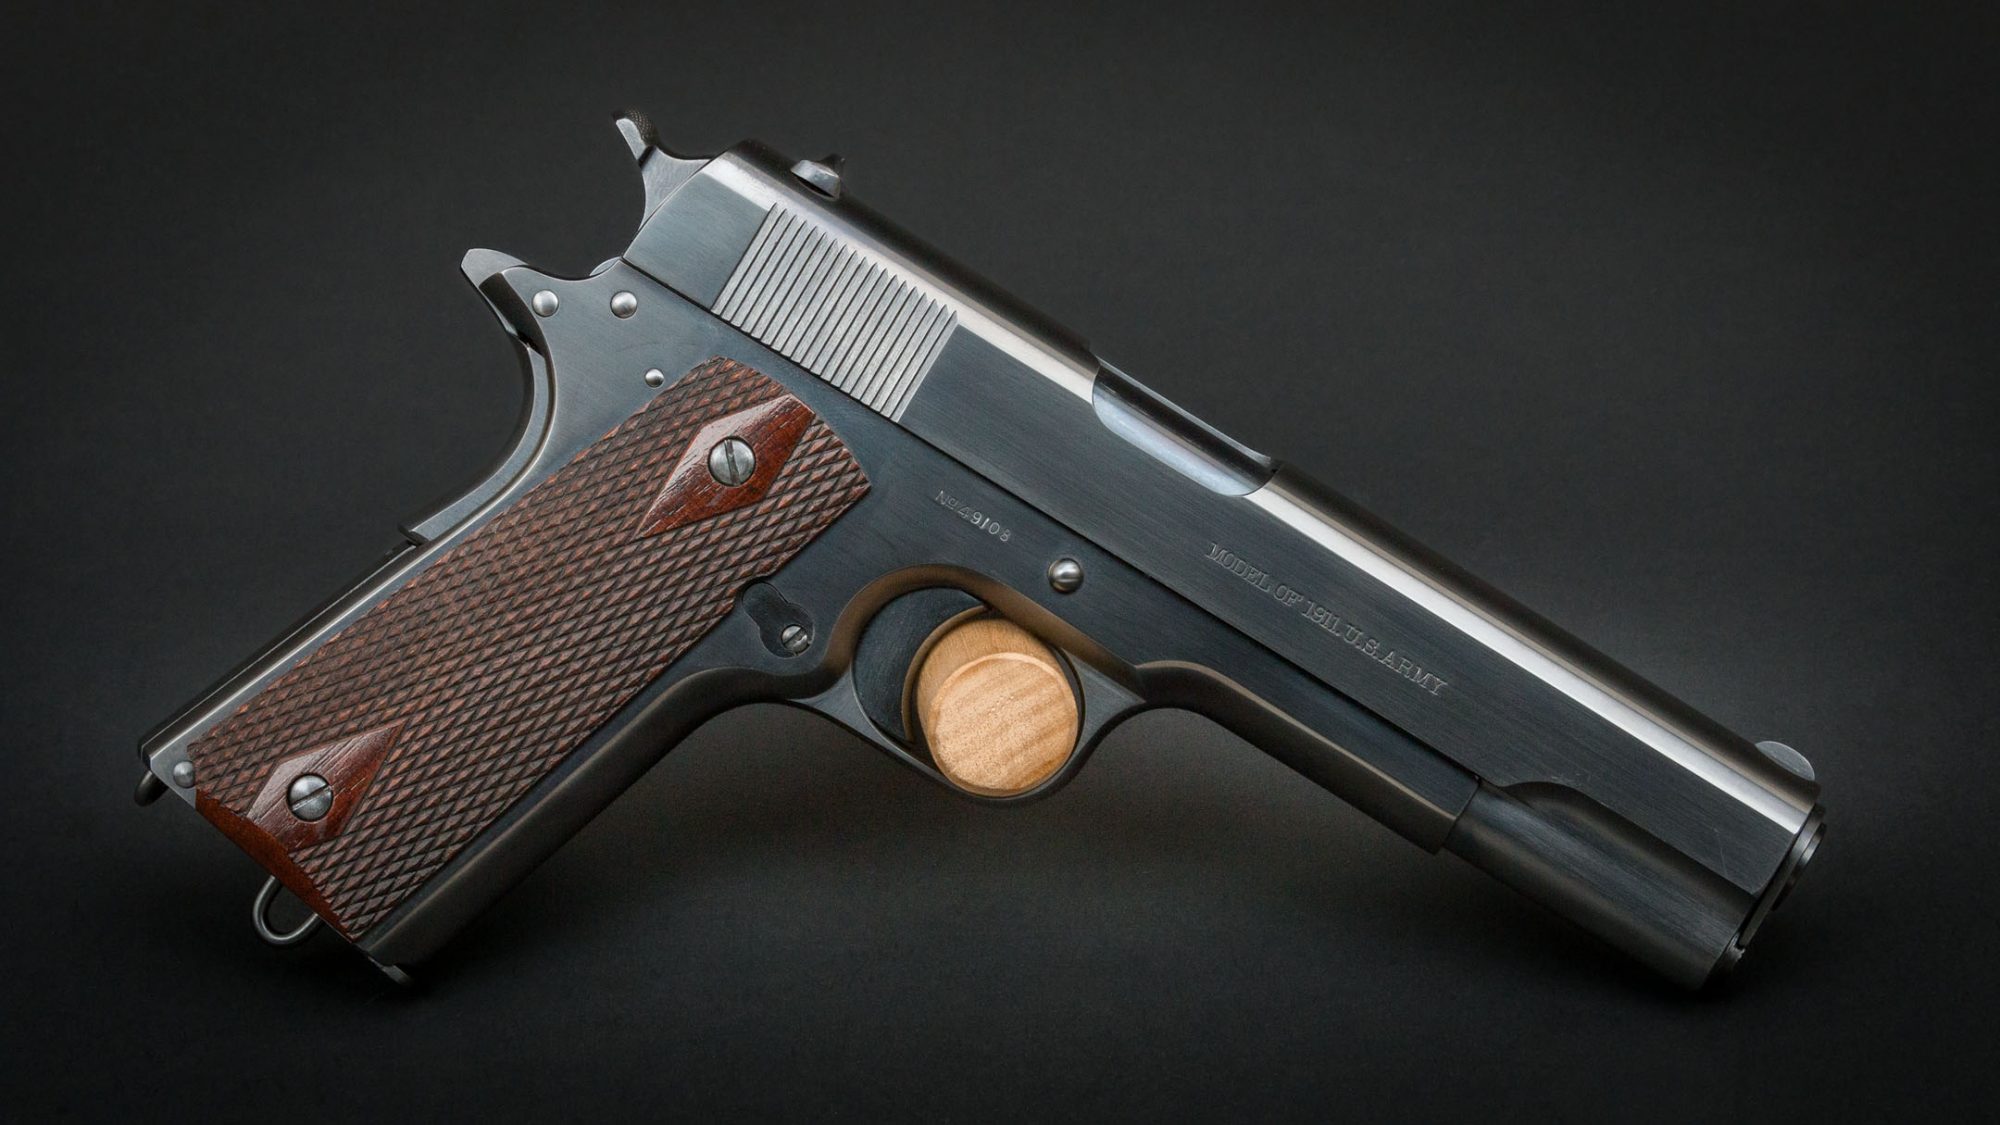 Colt 1911 U.S. Army from 1913, restored by Turnbull Restoration in 2017, and now for sale